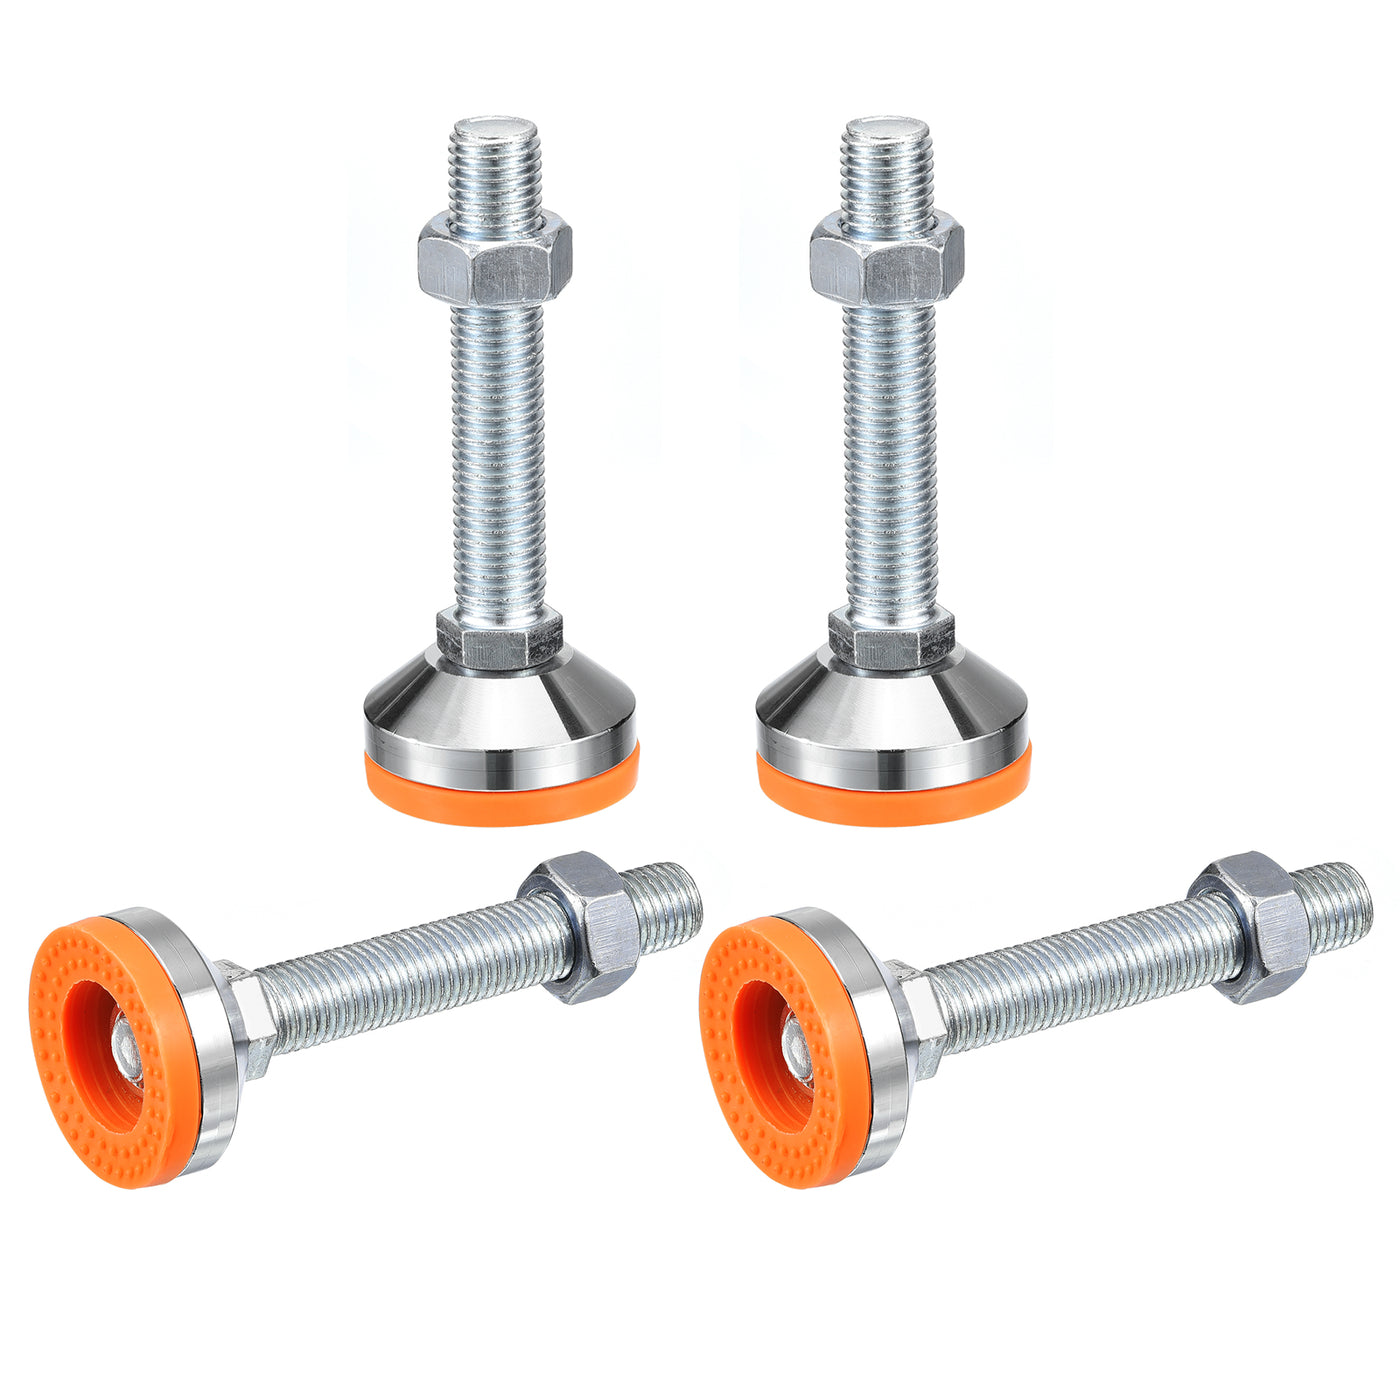 uxcell Uxcell Leveling Feet, 4Pcs M20x120x60mm - Carbon Steel Non-Skid Anti-shock Adjustable Table Feet, Leveling Screw Leg for Furniture Workshops Equipment